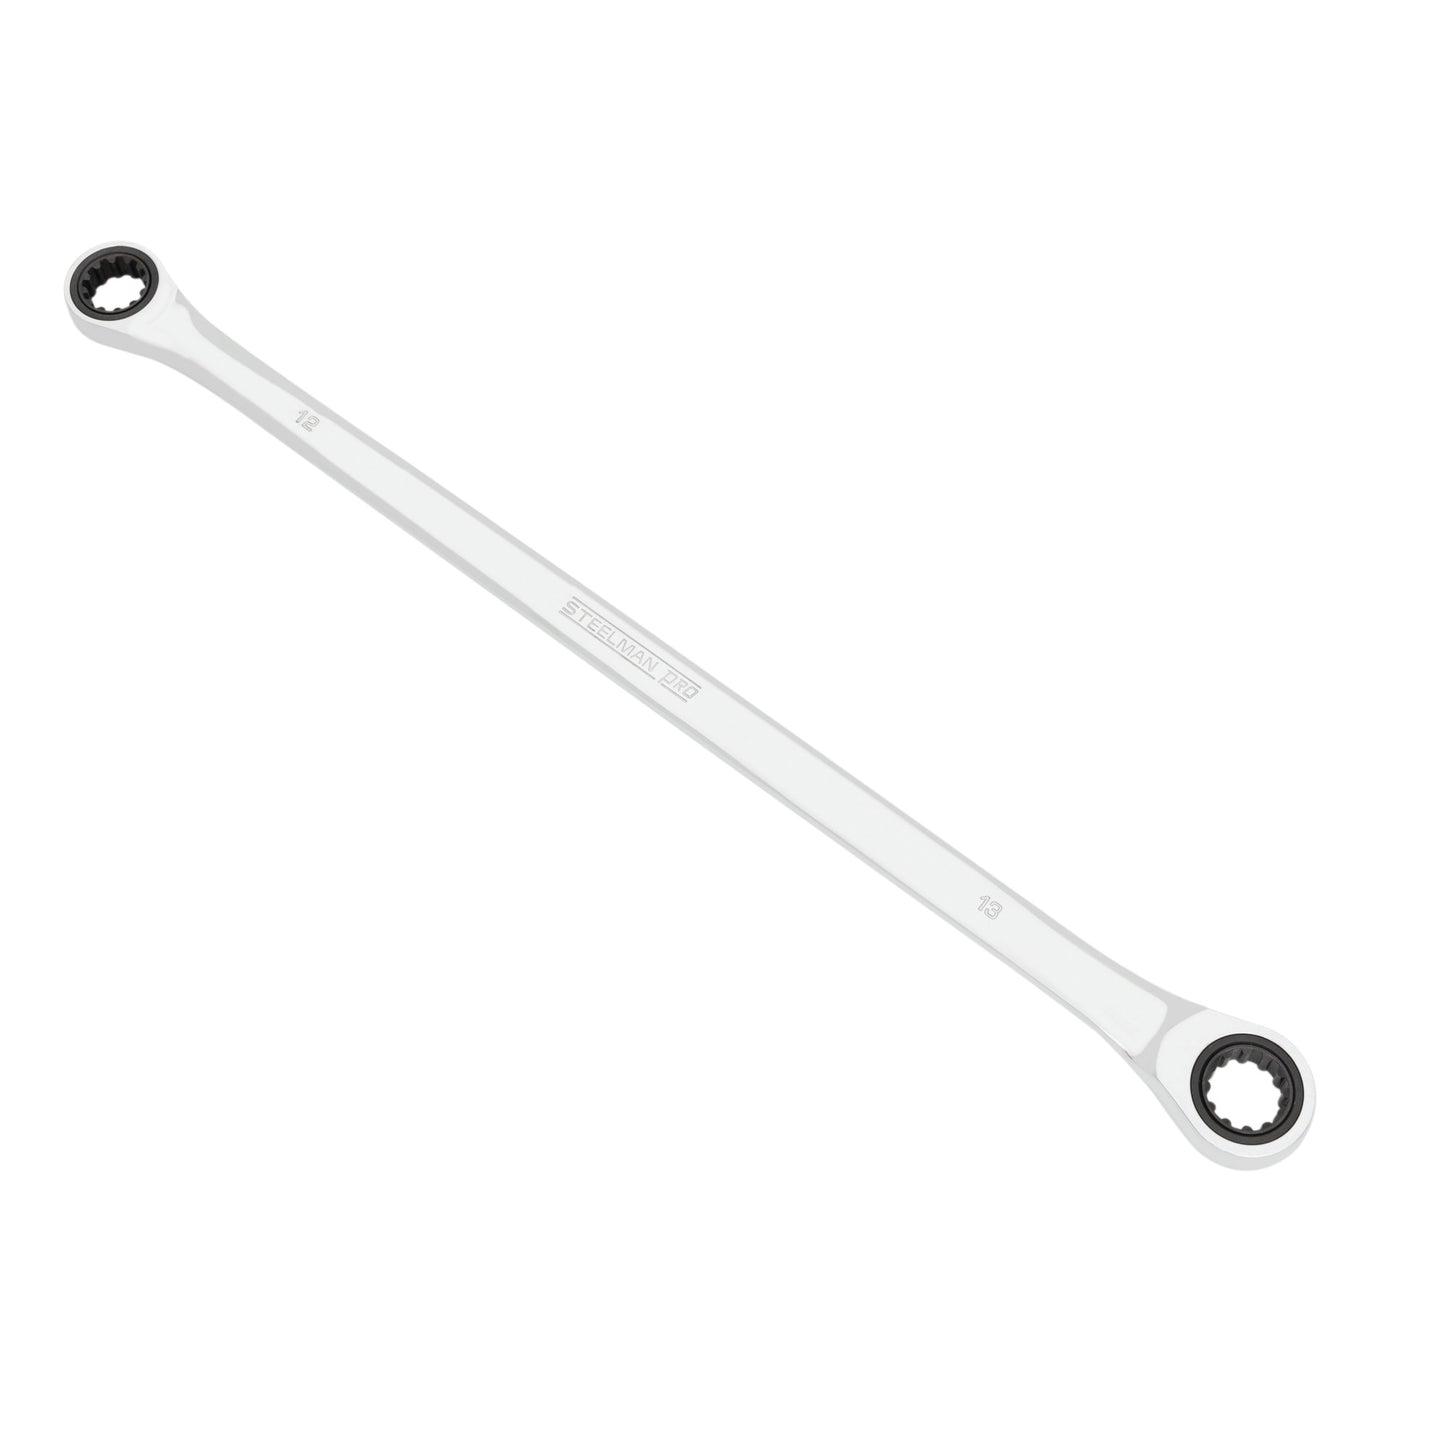 12mm x 13mm Double Box-End Universal Spline Extra Long Ratcheting Wrench